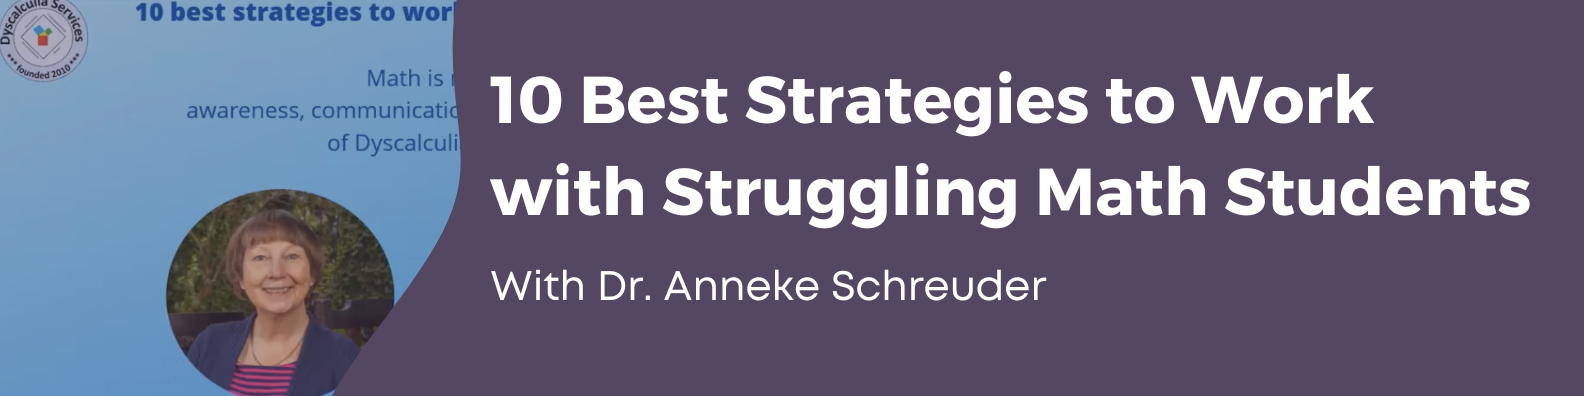 10 Best Strategies to Work with Struggling Math Students